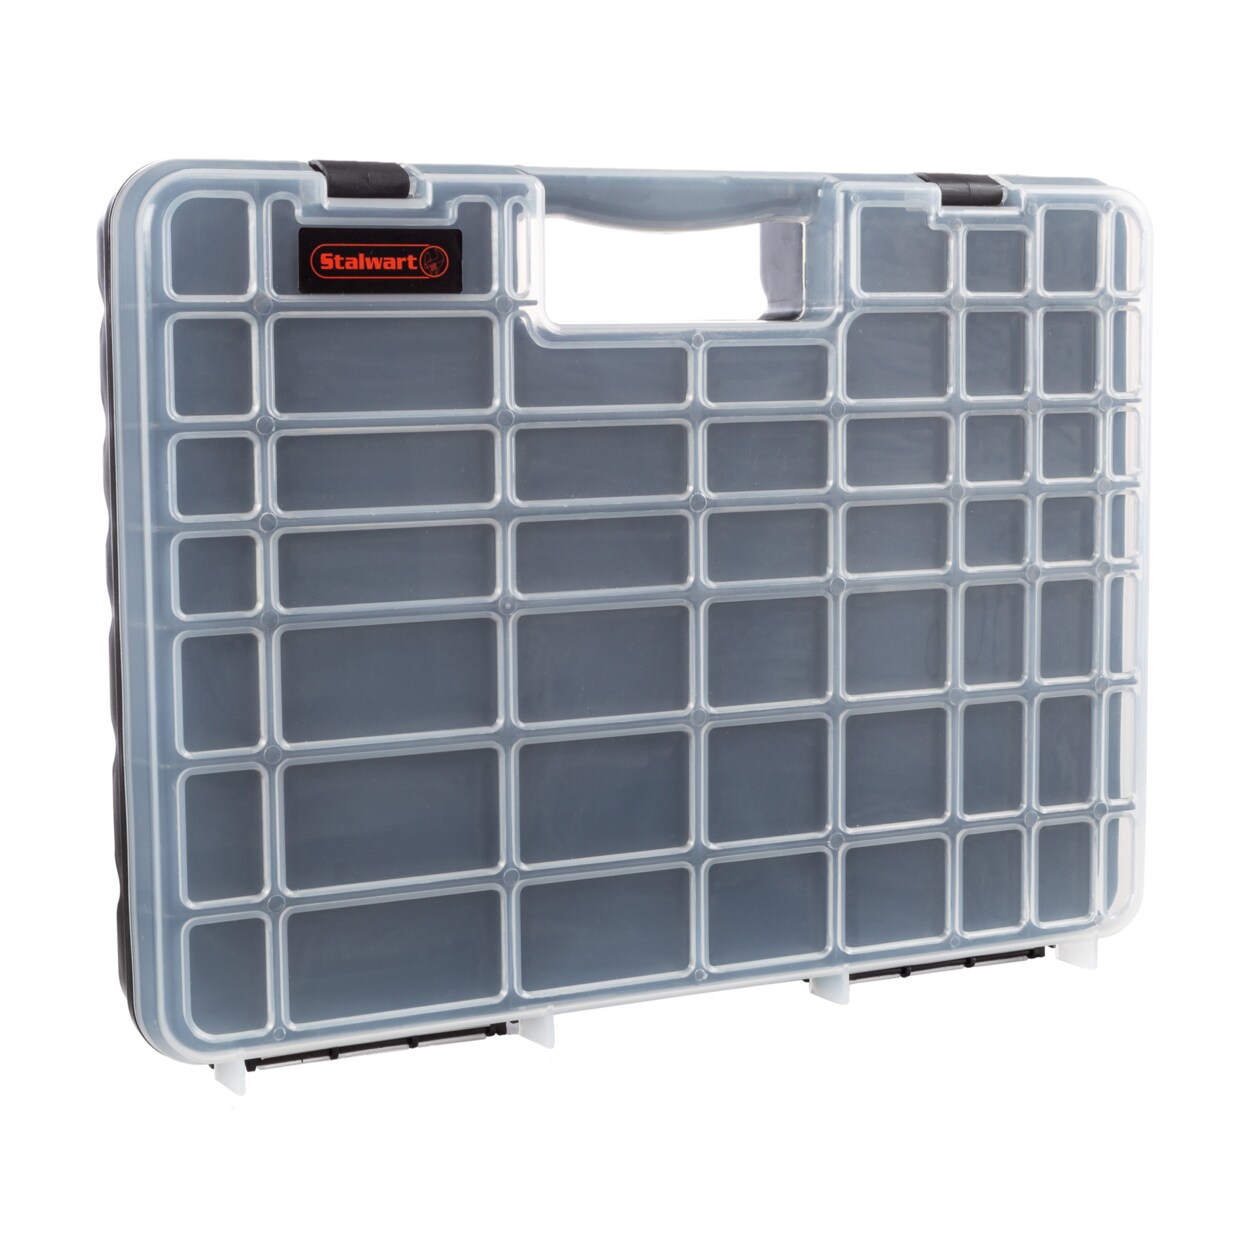 Stalwart Portable Storage Case with Secure Latch 55 Small Compartments for Screws Bolts Nuts Nails Beads or Crafts